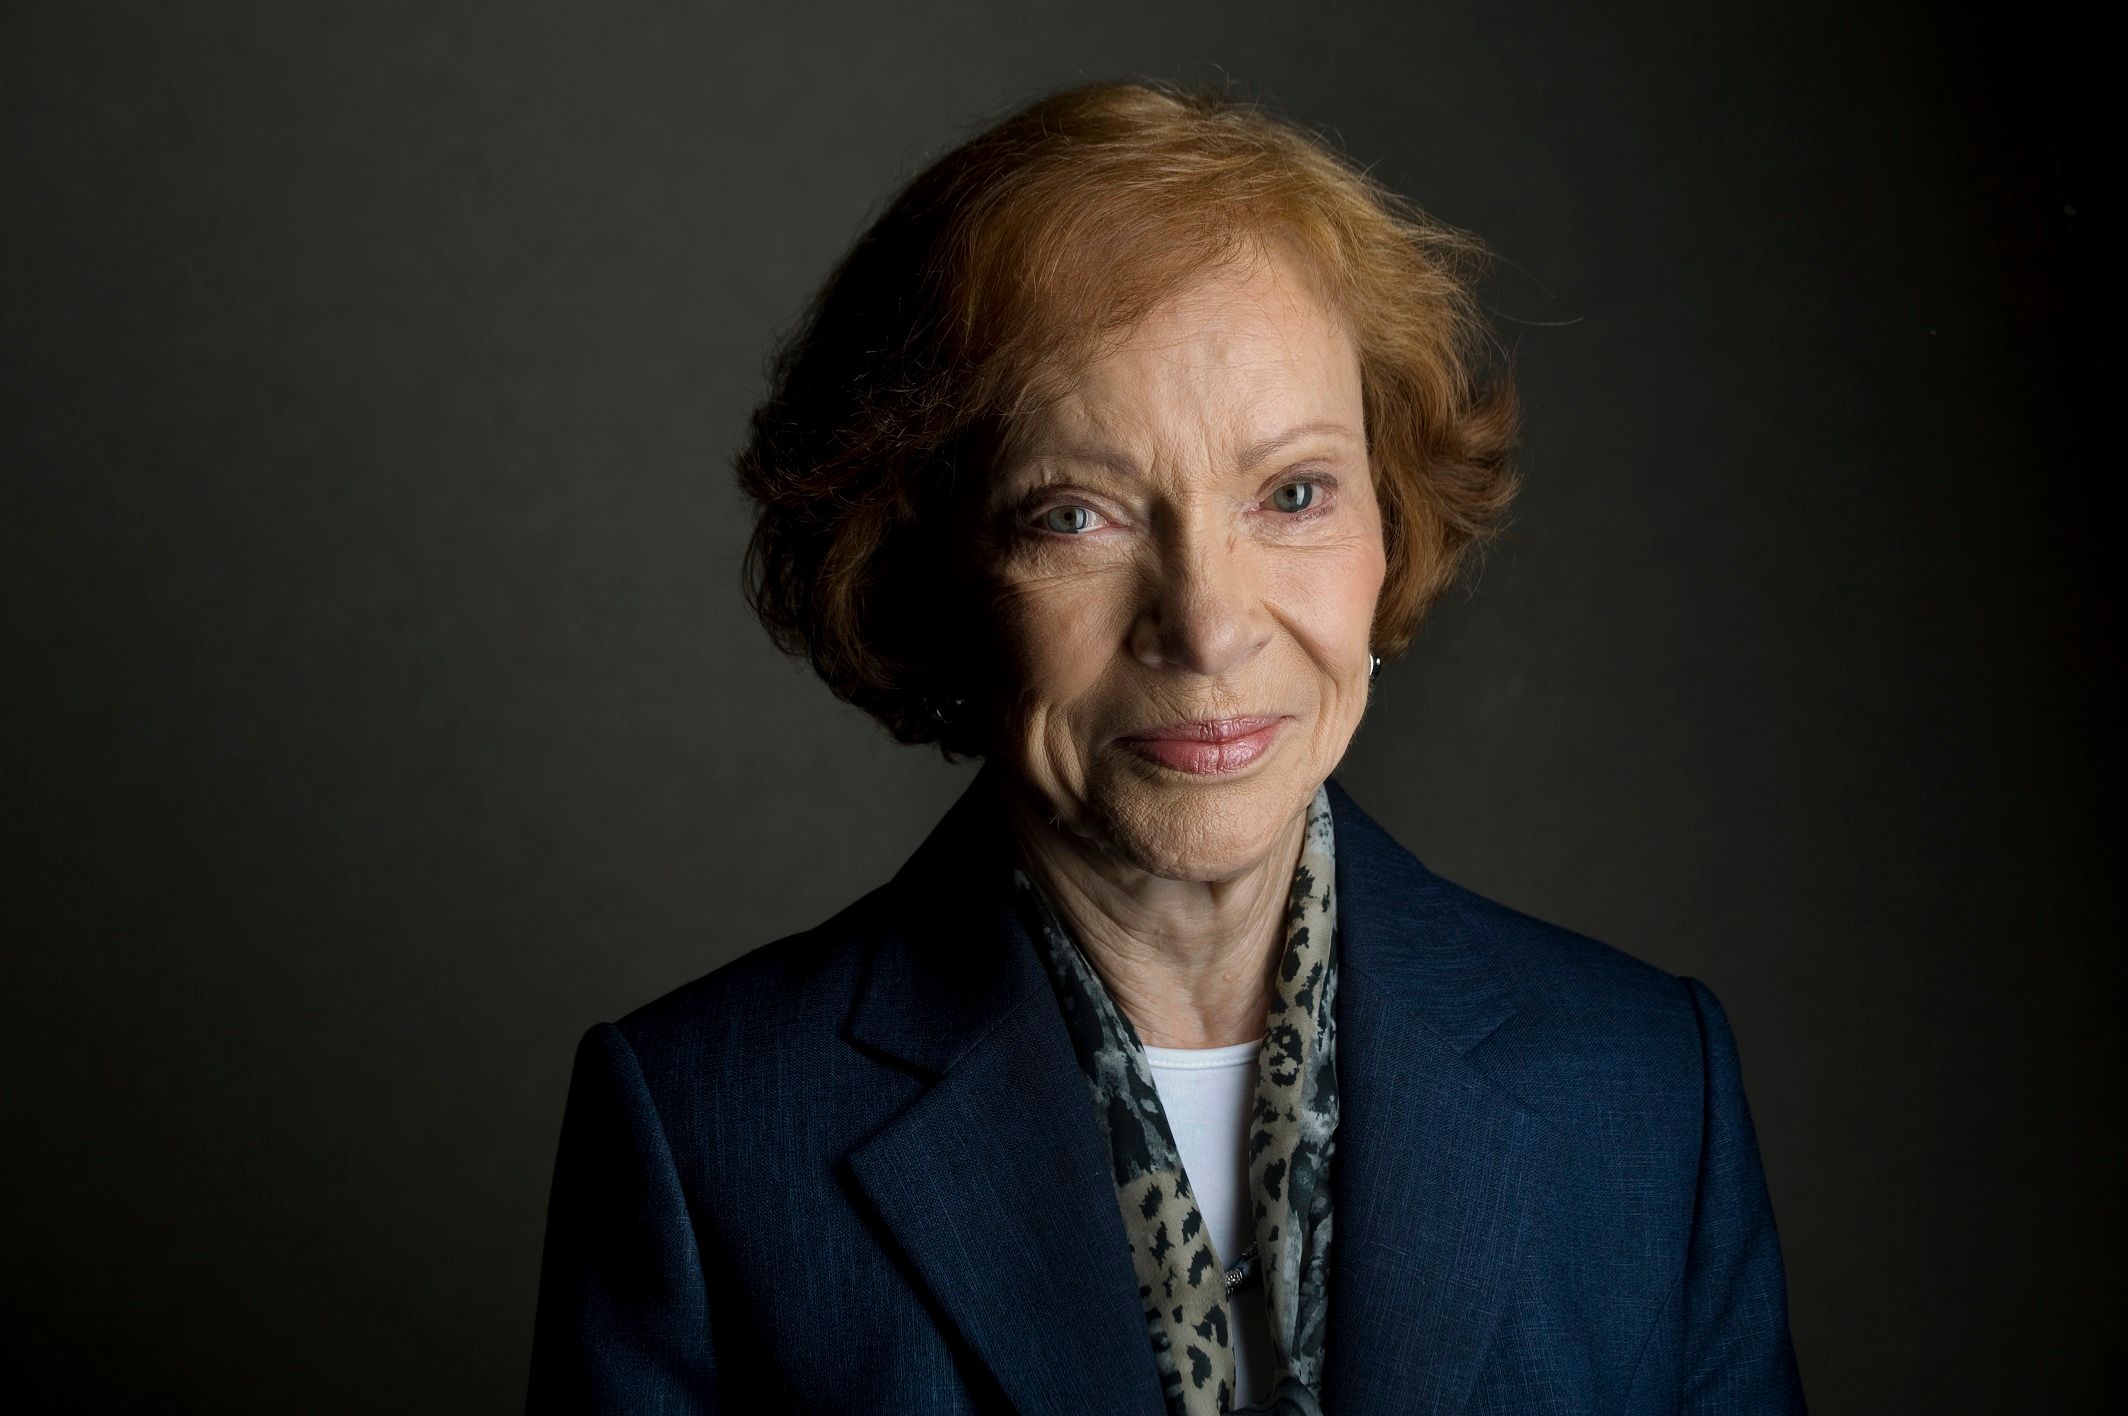 Rosalynn Carter smiles for a photo in New York City on Friday, September 23, 2011. | Source: Getty Images